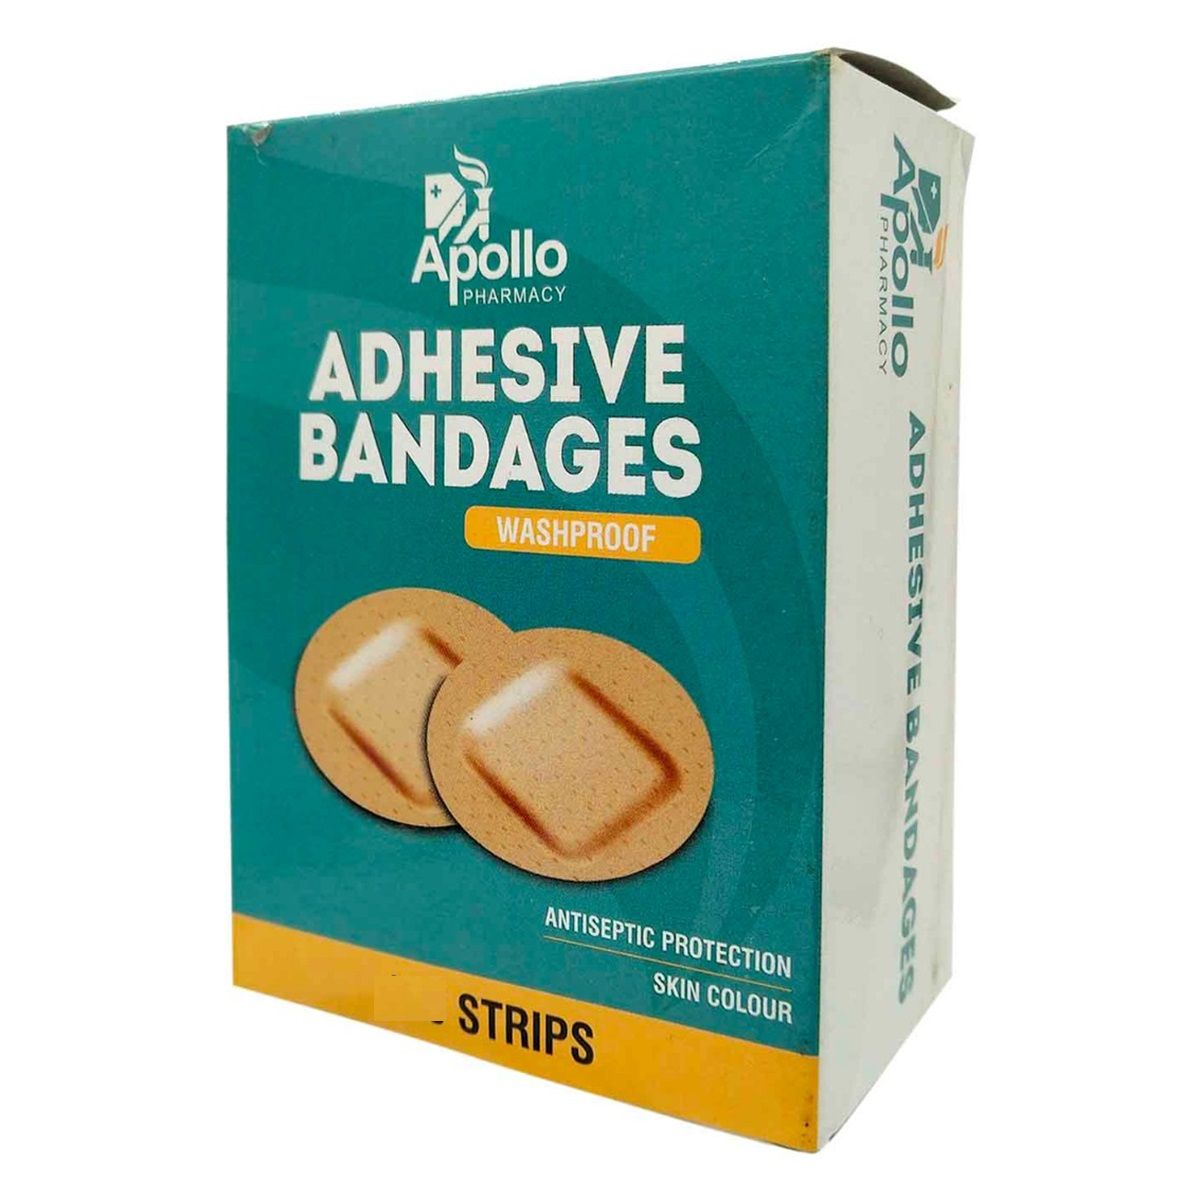 Apollo Pharmacy Adhesive Round Bandage Wash Proof, 1 Count Price, Uses,  Side Effects, Composition - Apollo Pharmacy